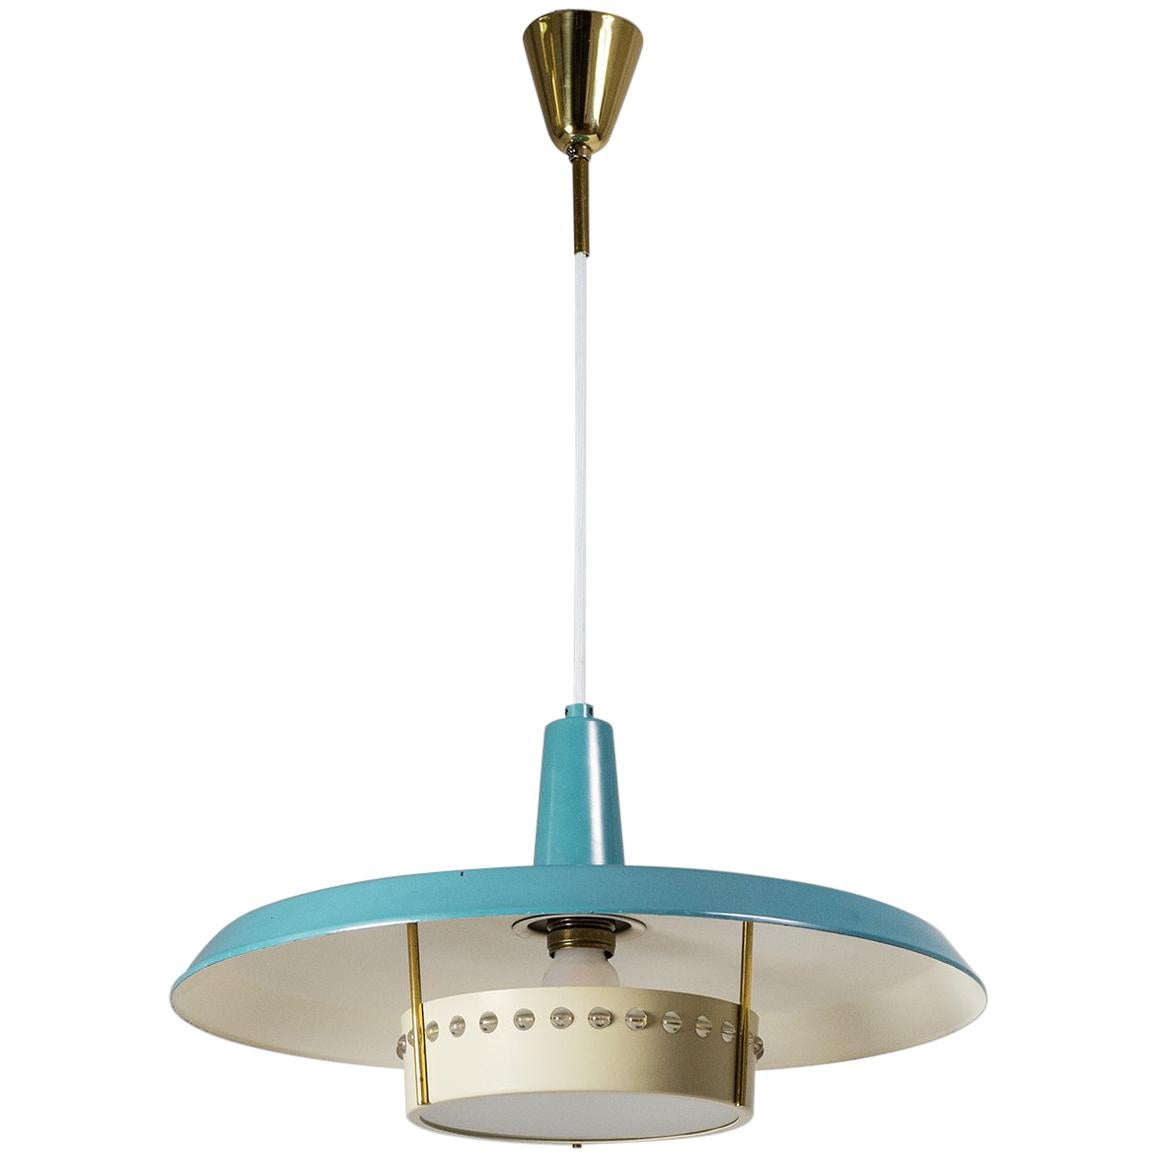 Large 1950s Pendant with Petrol Colored Shade